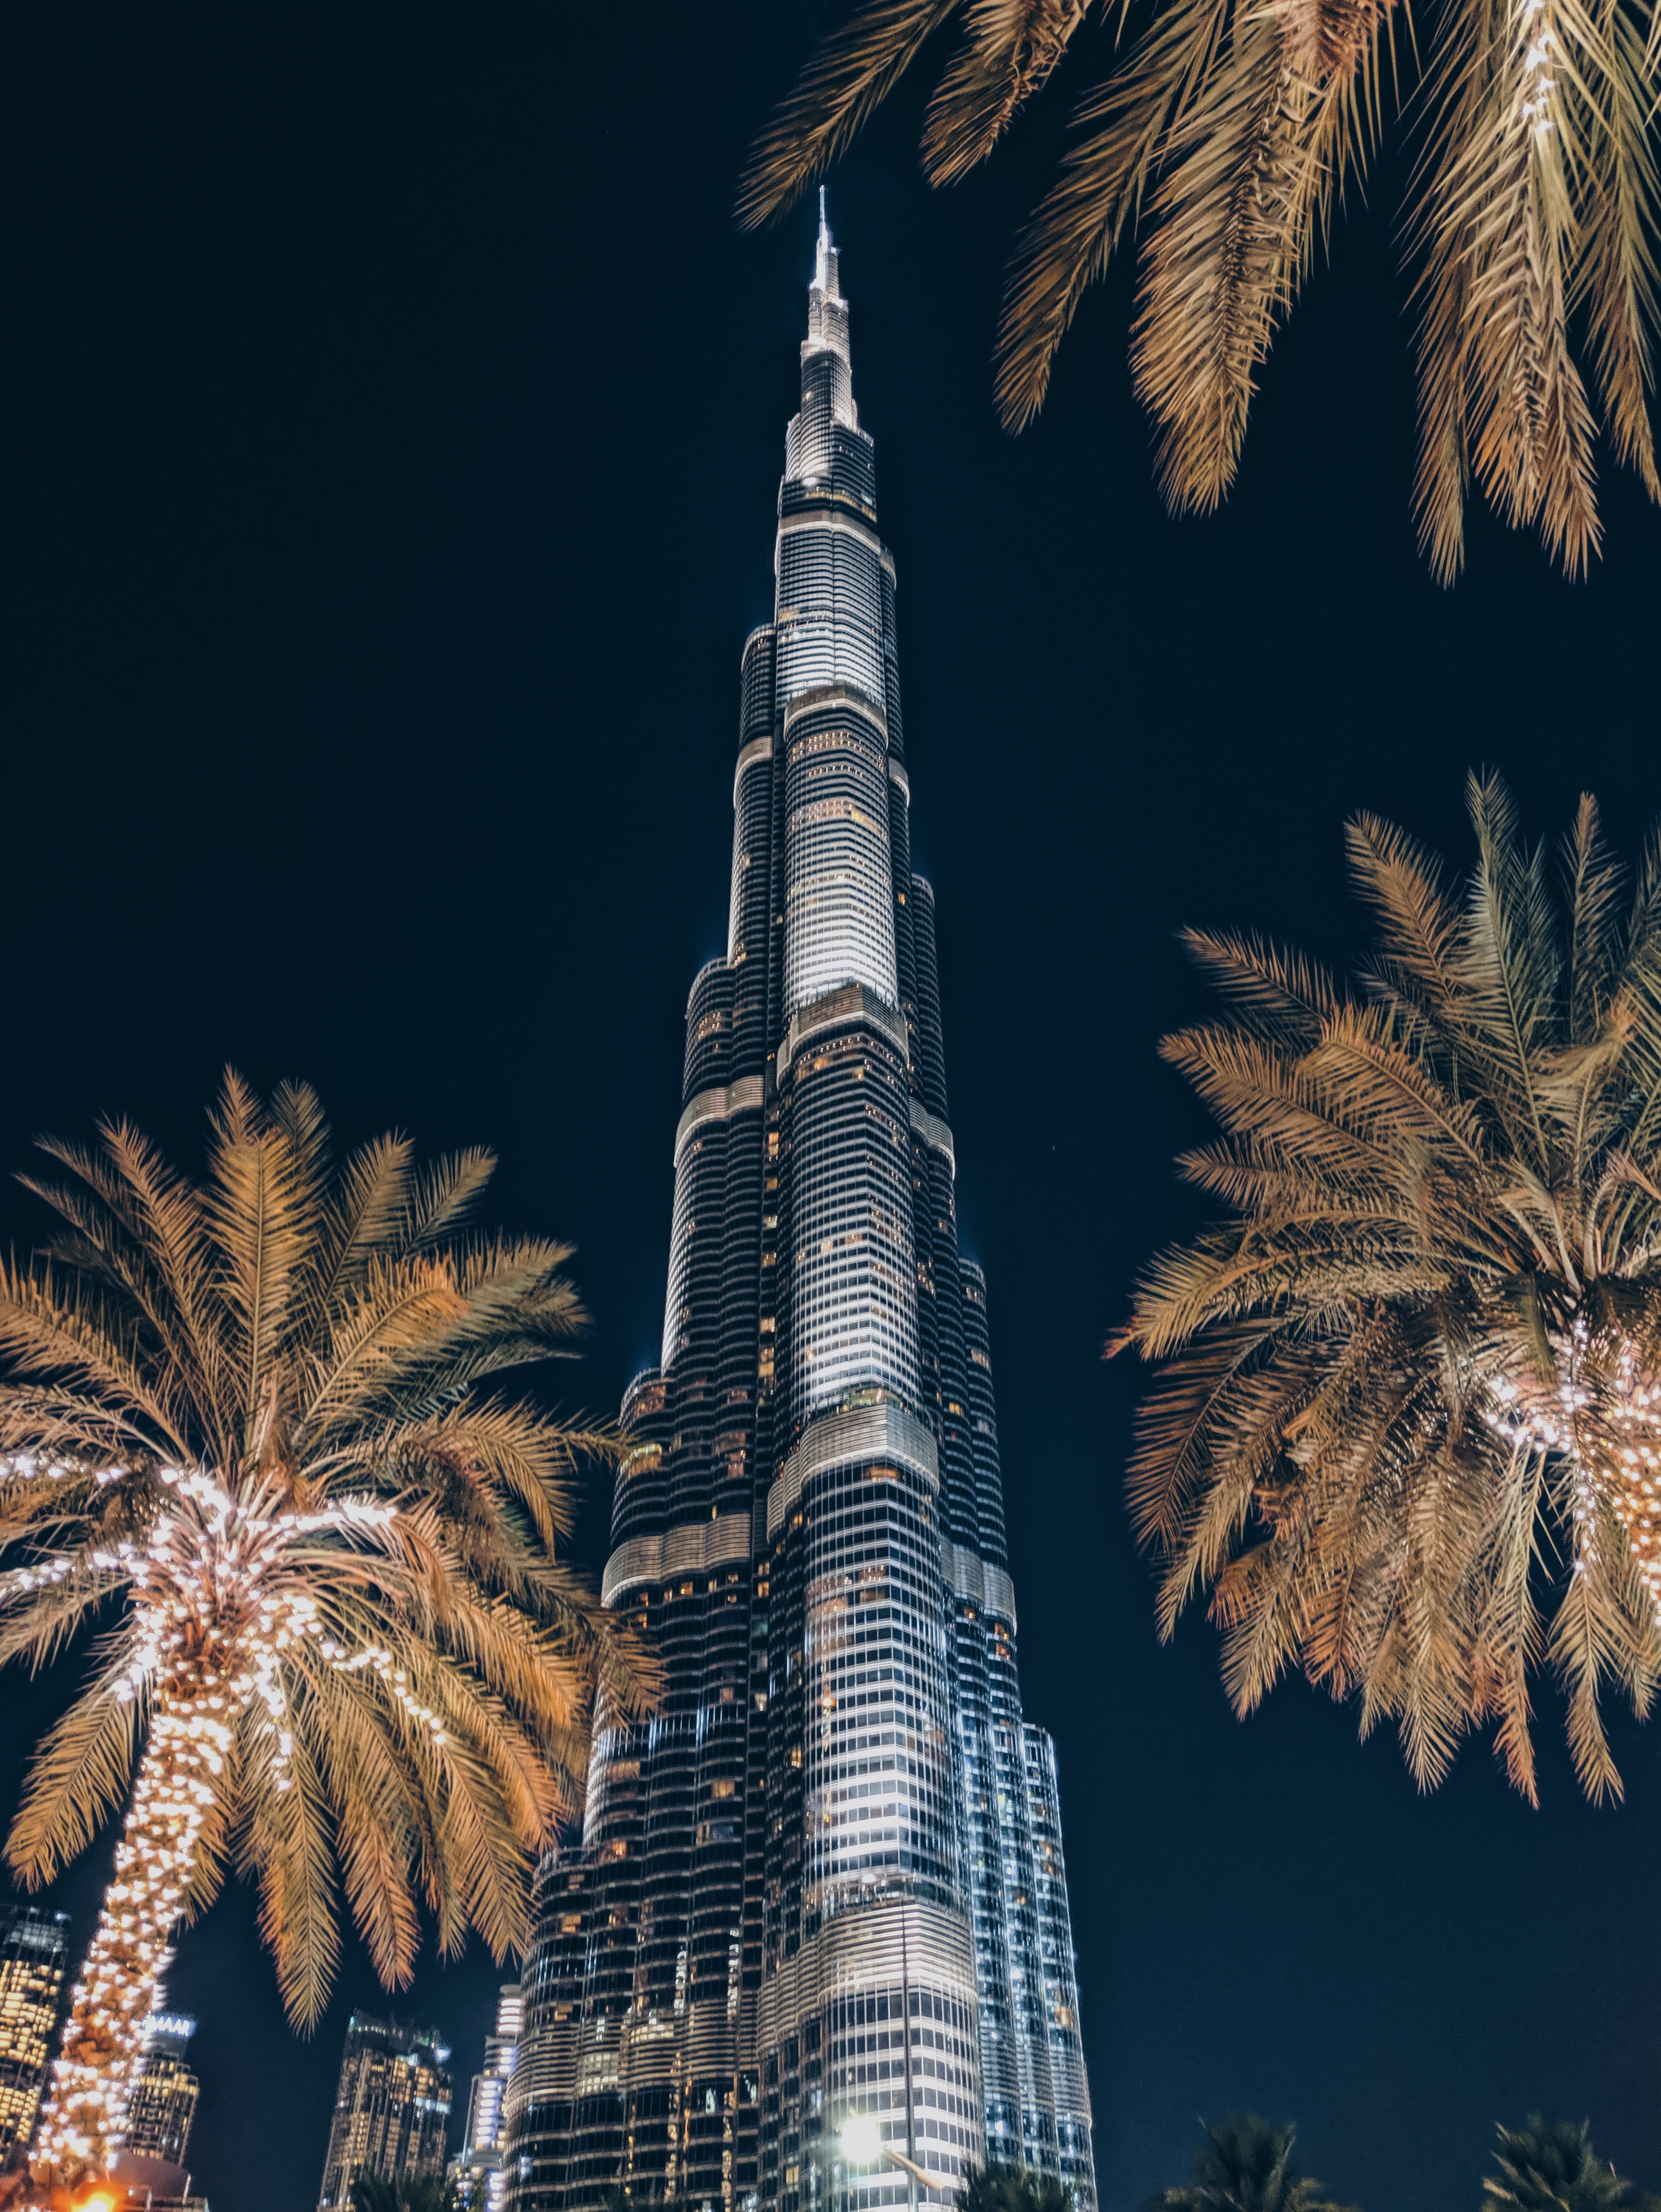 architecture, skyscraper, cities, palms, building, tower